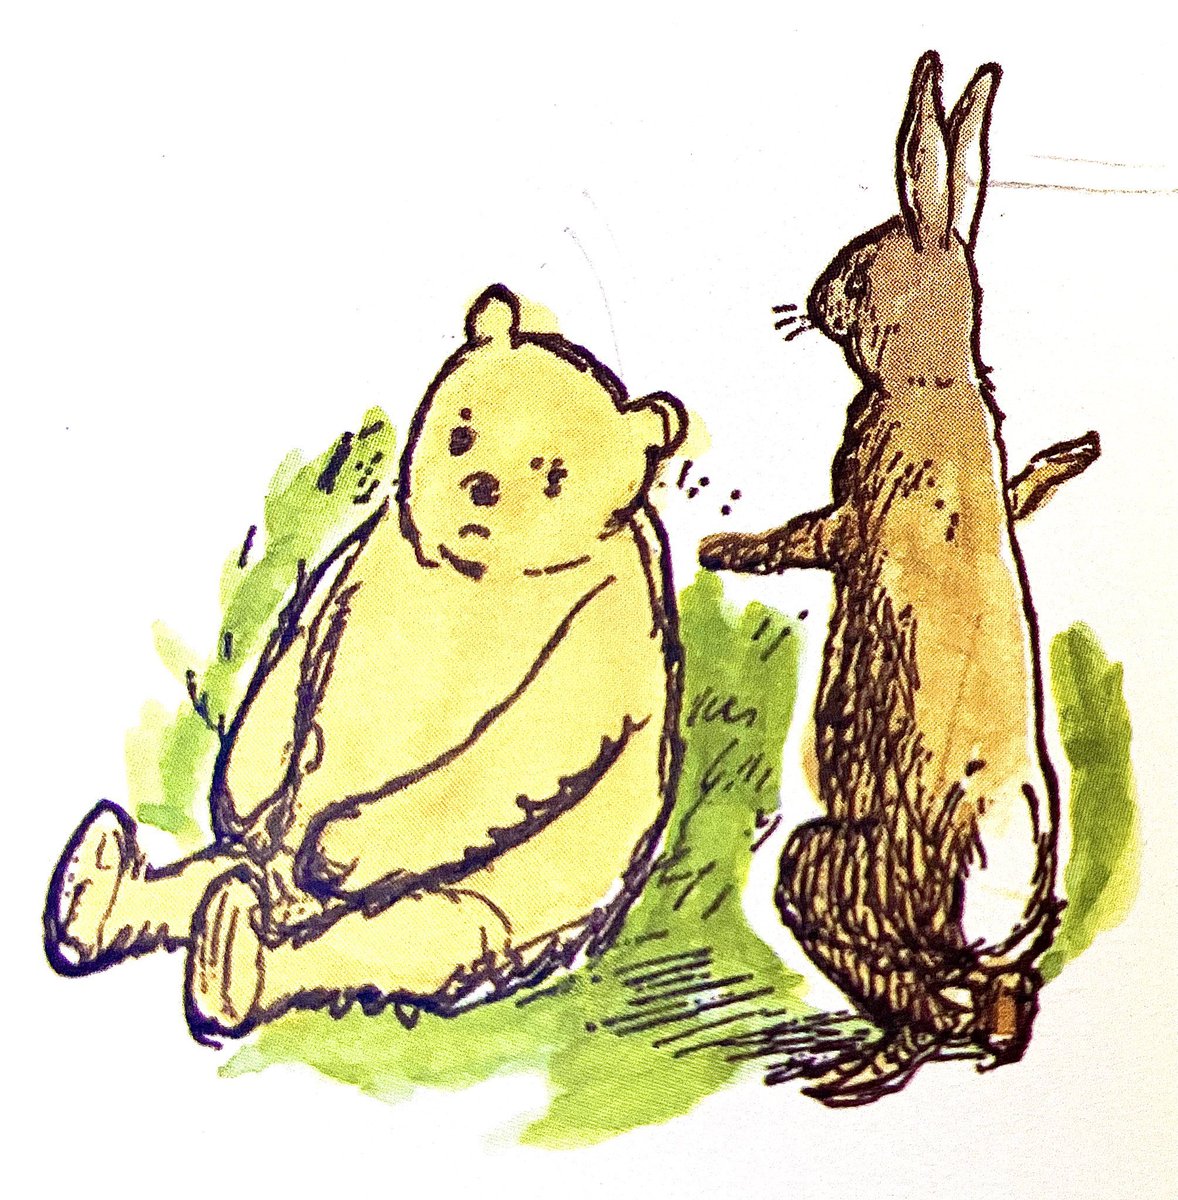 “Hello, Pooh,” said Rabbit.
“Hallo, Rabbit,” said Pooh dreamily.
“Did you make that song up?”
“Well, I sort of made it up,” said Pooh. It comes to me sometimes.”
“Ah!” said Rabbit, who never let things come to him, but always went and fetched them. ~A.A.Milne #TuesdayThoughts